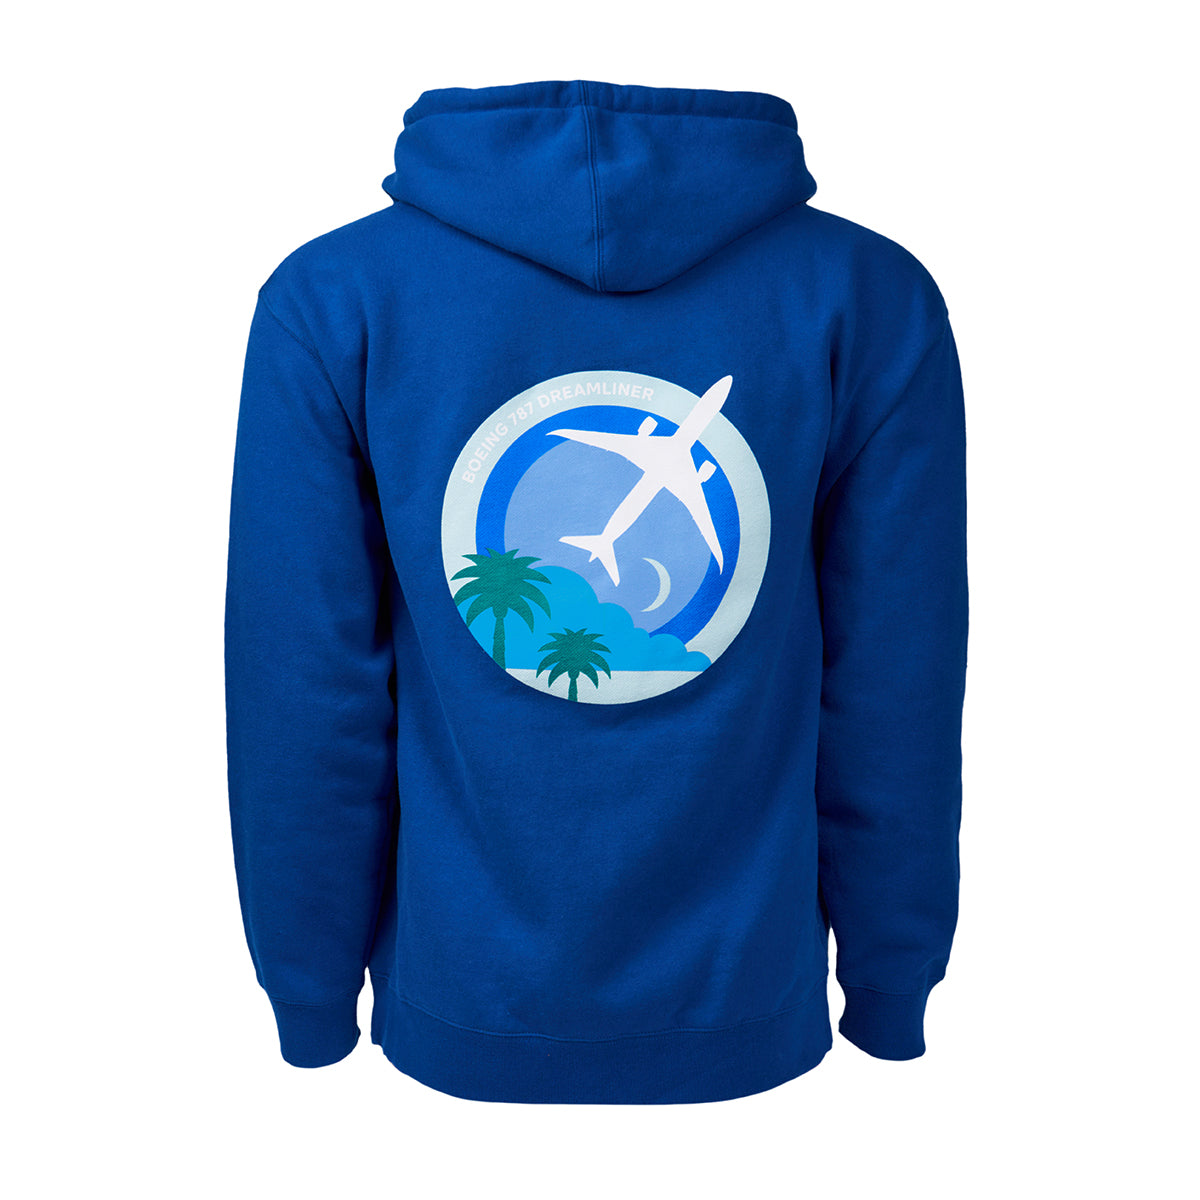 Full product image of the back side of the hooded sweatshirt in a royal blue color.  Showing the Skyward graphic of the Boeing 787 Dreamliner.